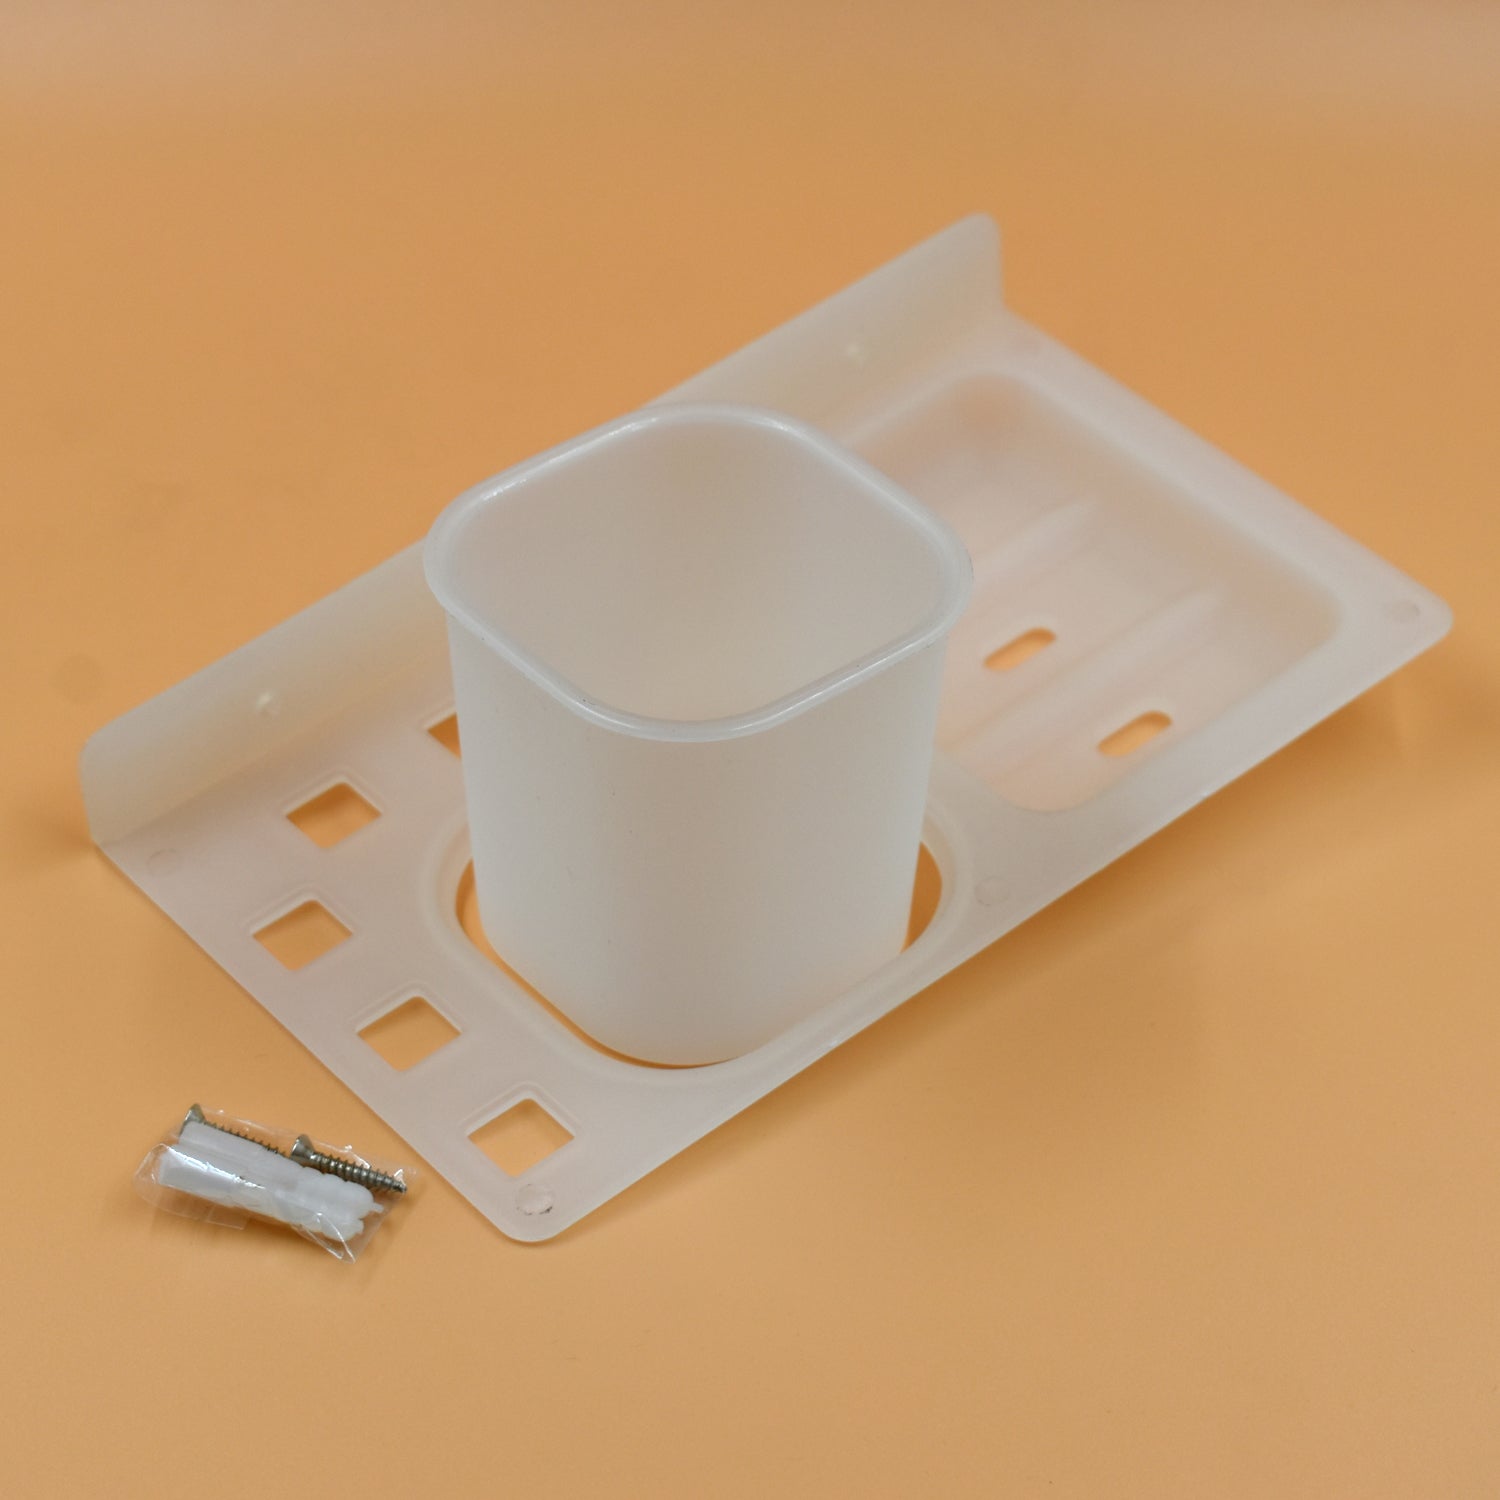 4776 3 in 1 Plastic Soap Dish and plastic soap dish tray used in bathroom and kitchen purposes. DeoDap